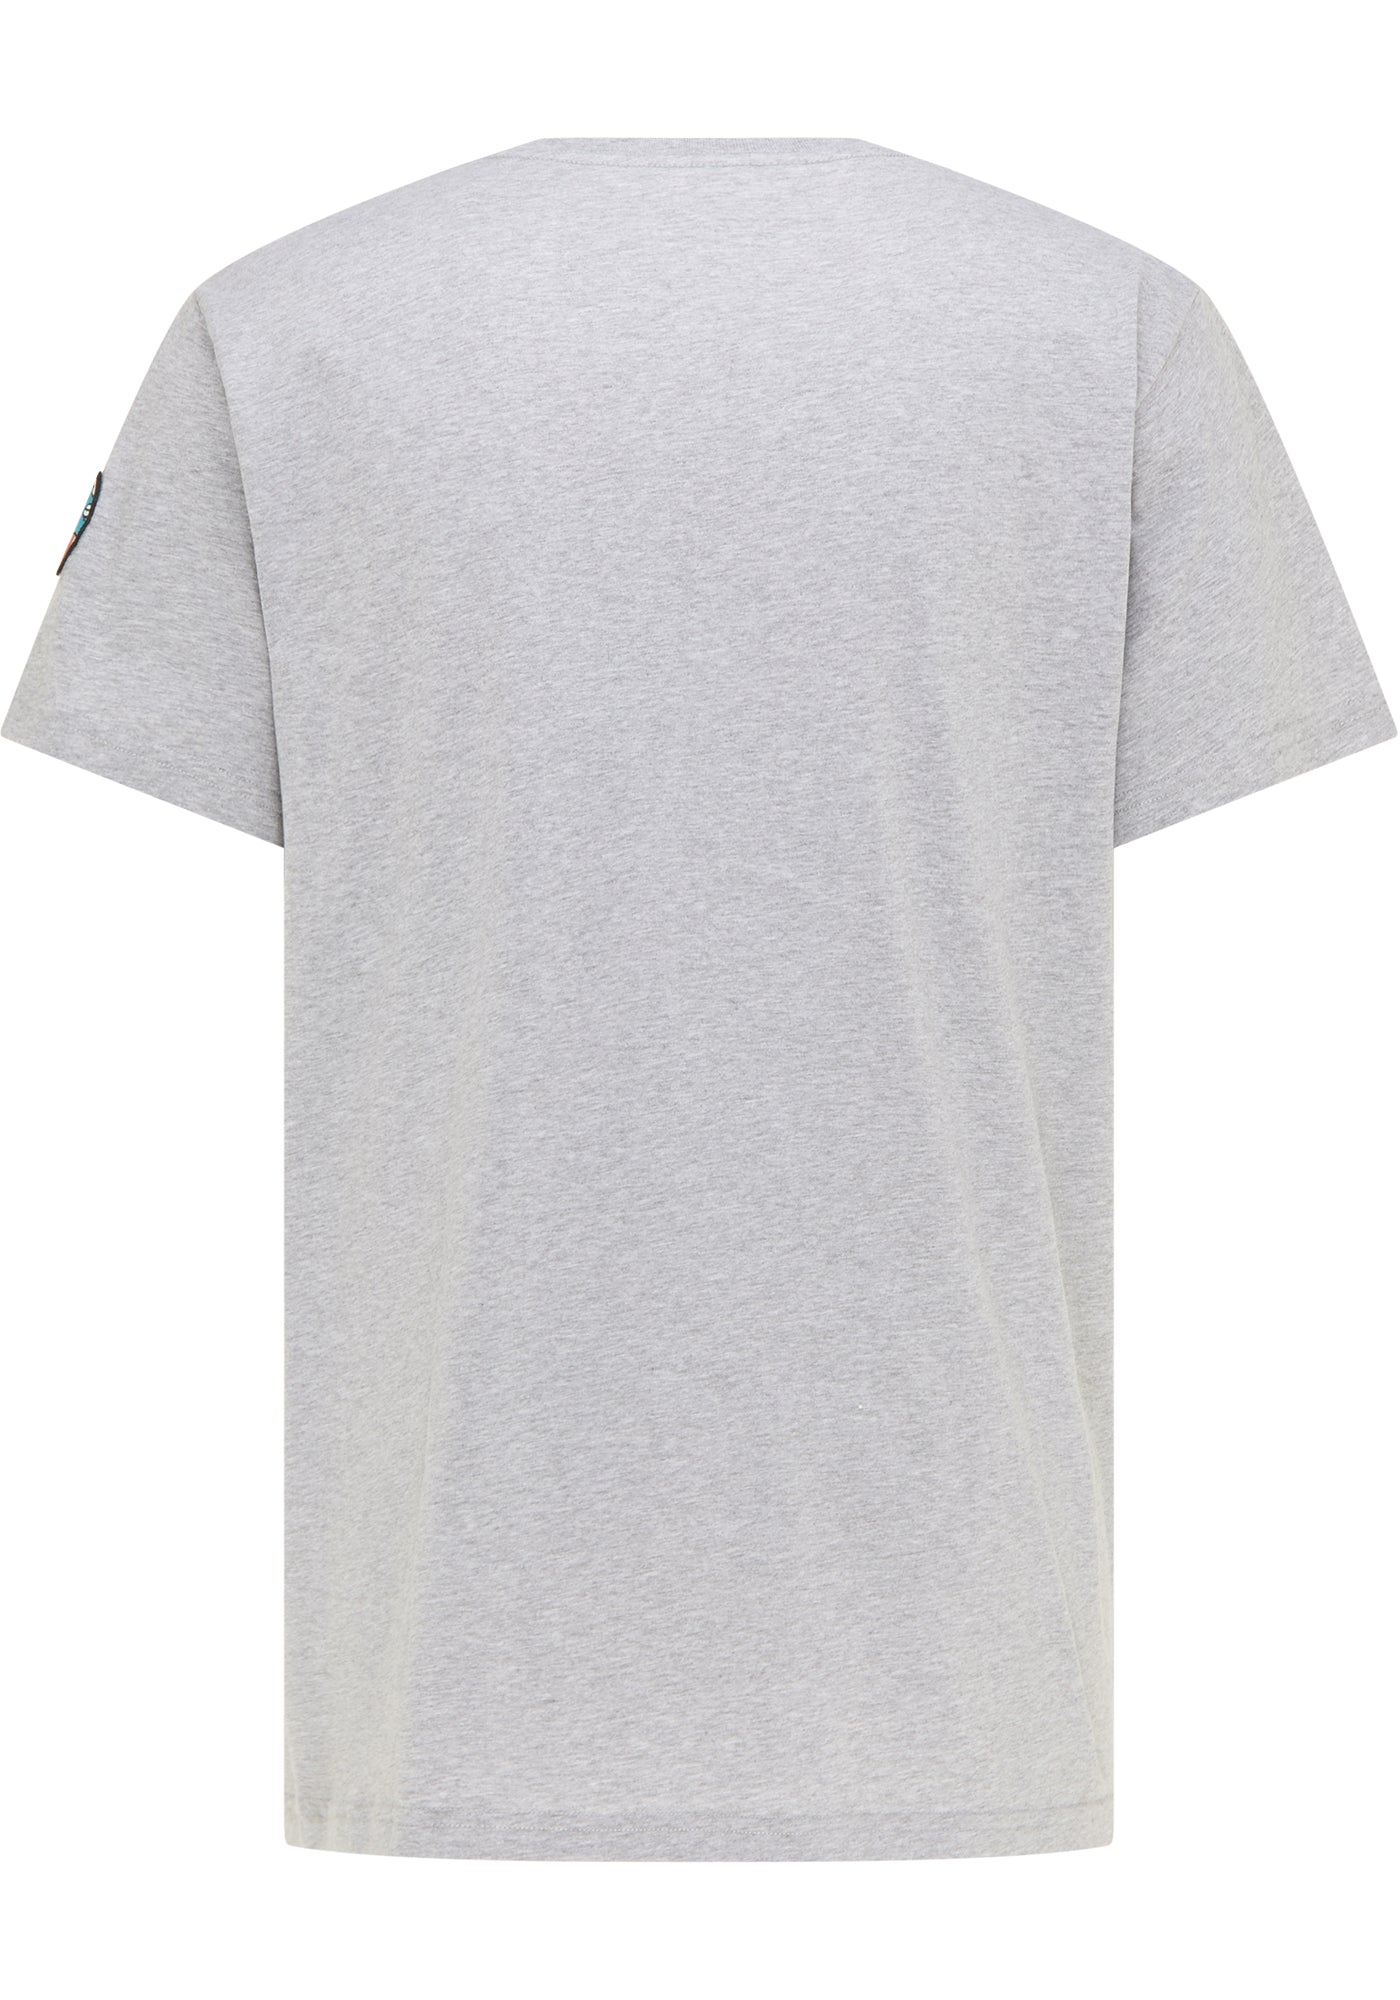 SOMWR INFLUENCER TEE T-Shirt GRY002